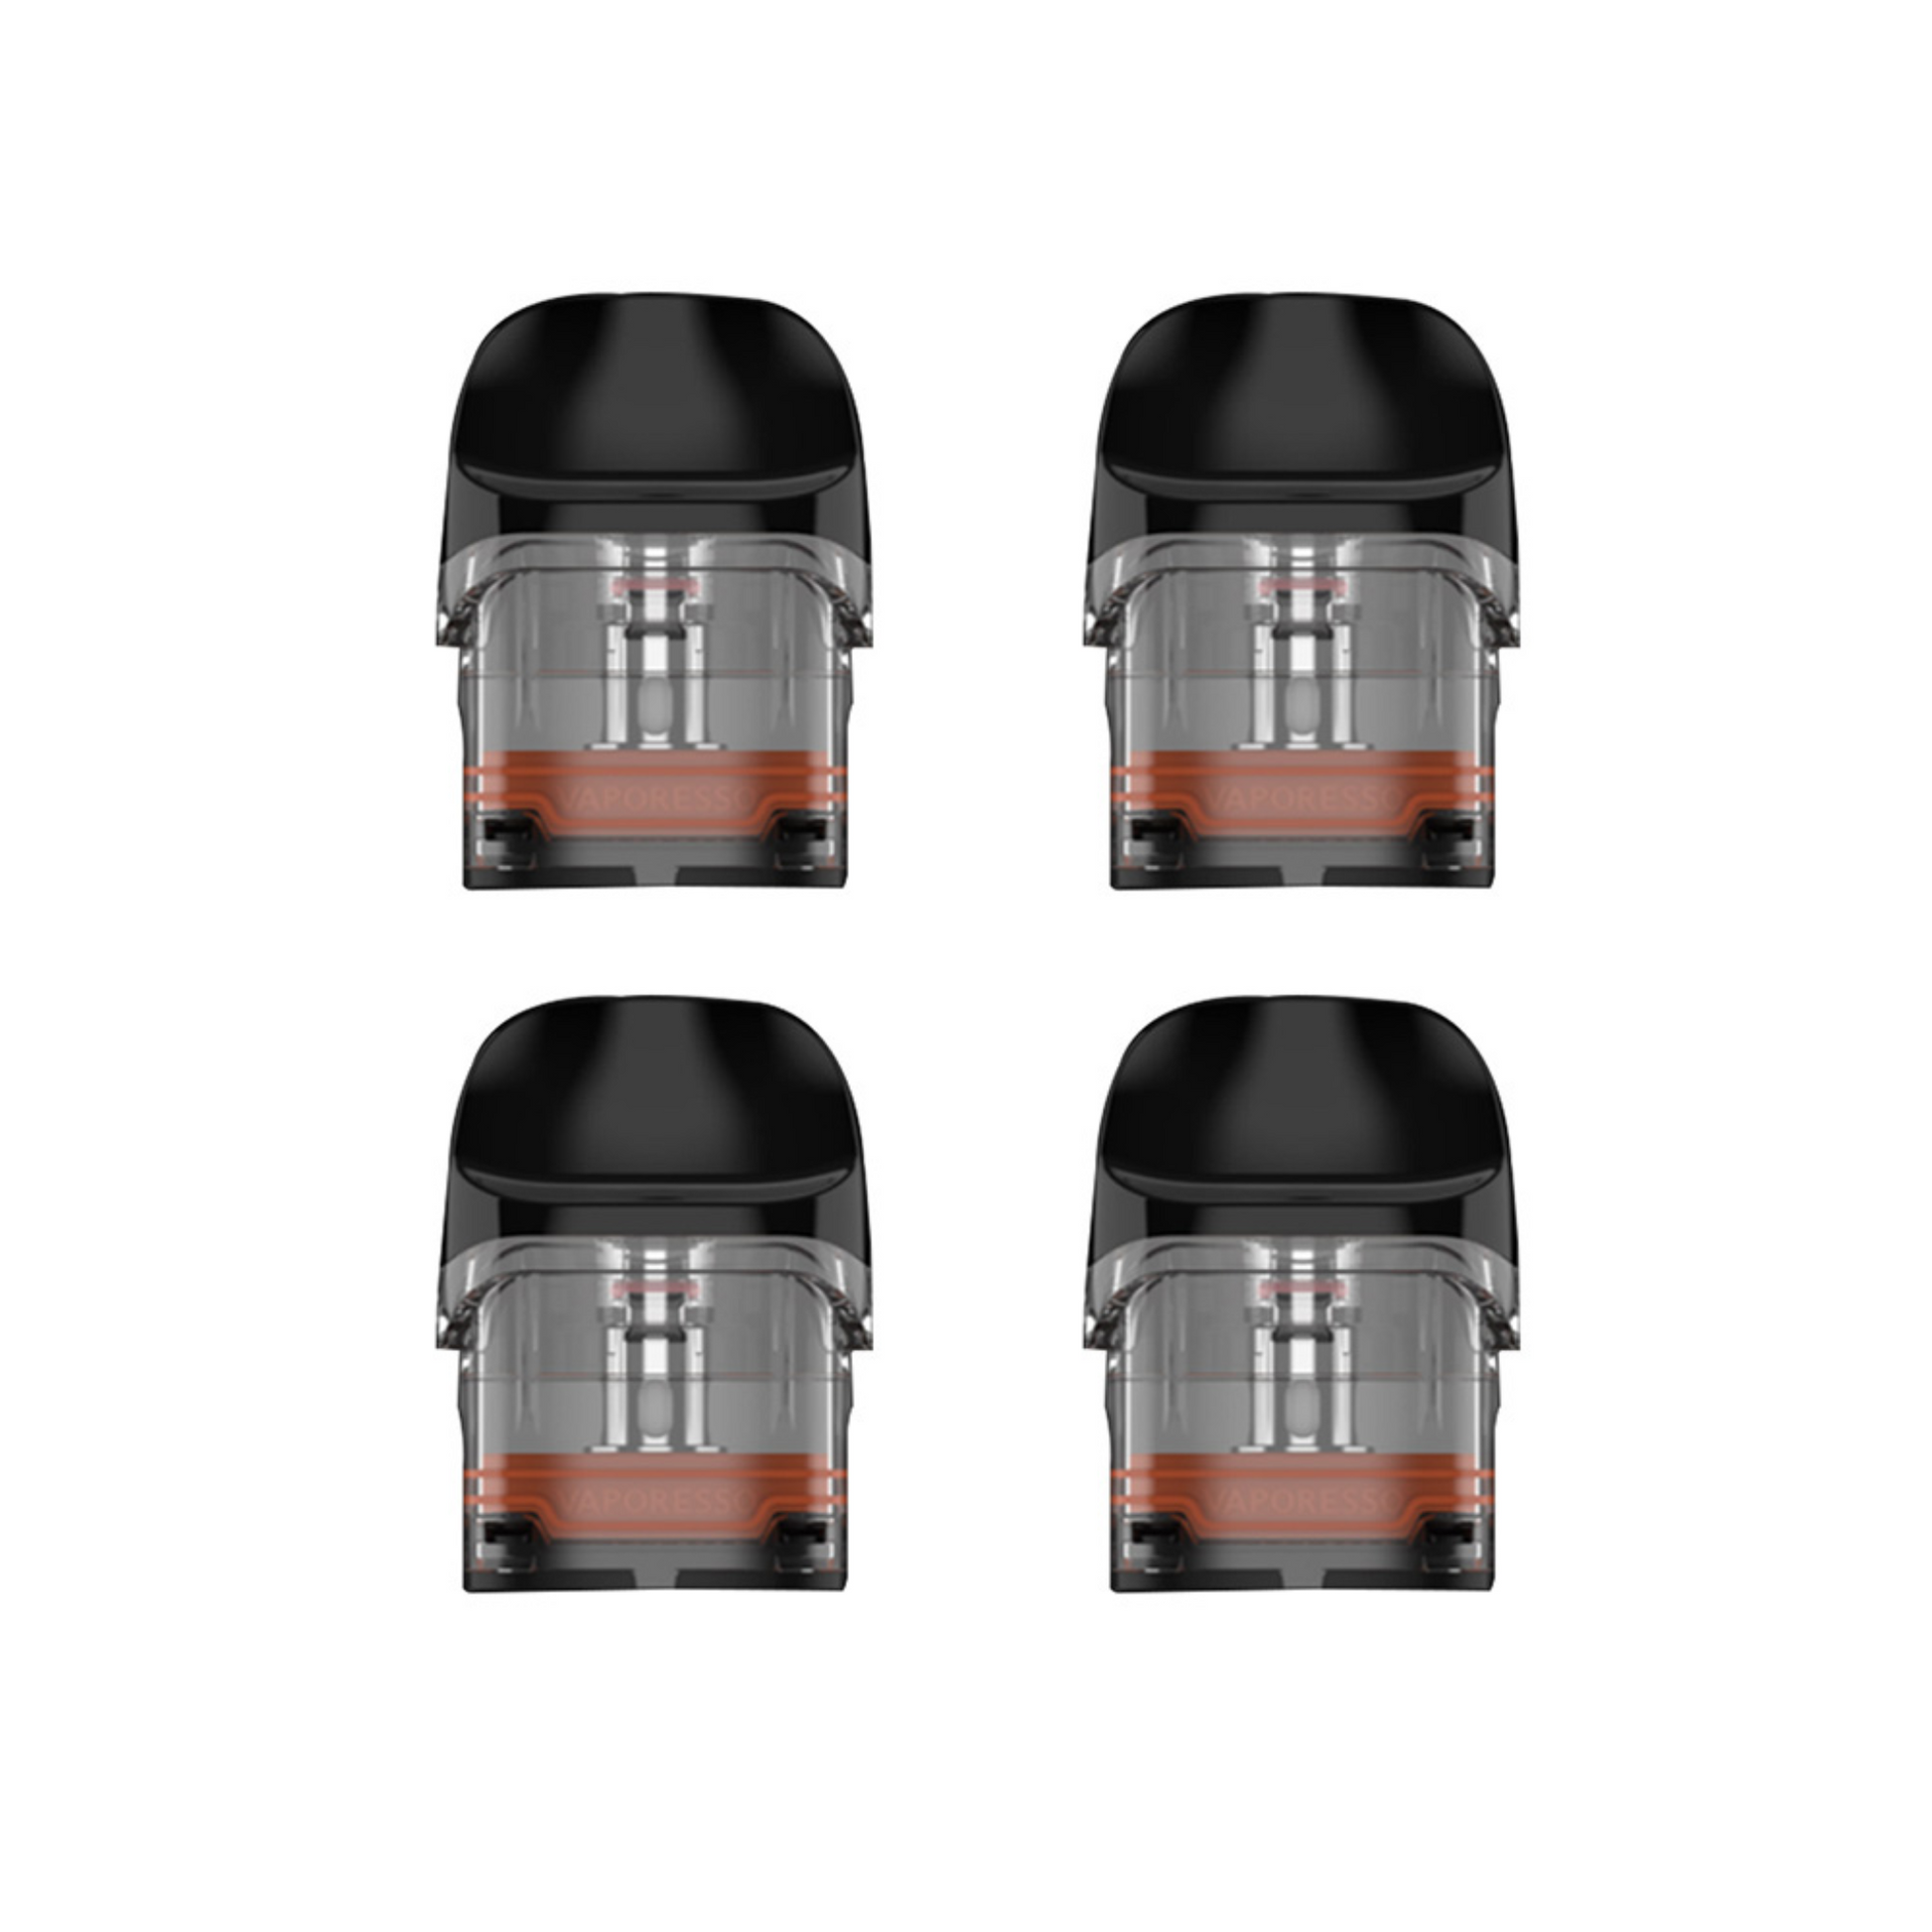 Vaporesso Luxe Q Replacement Pod - 2mL (4-Pack) 0.6 ohm